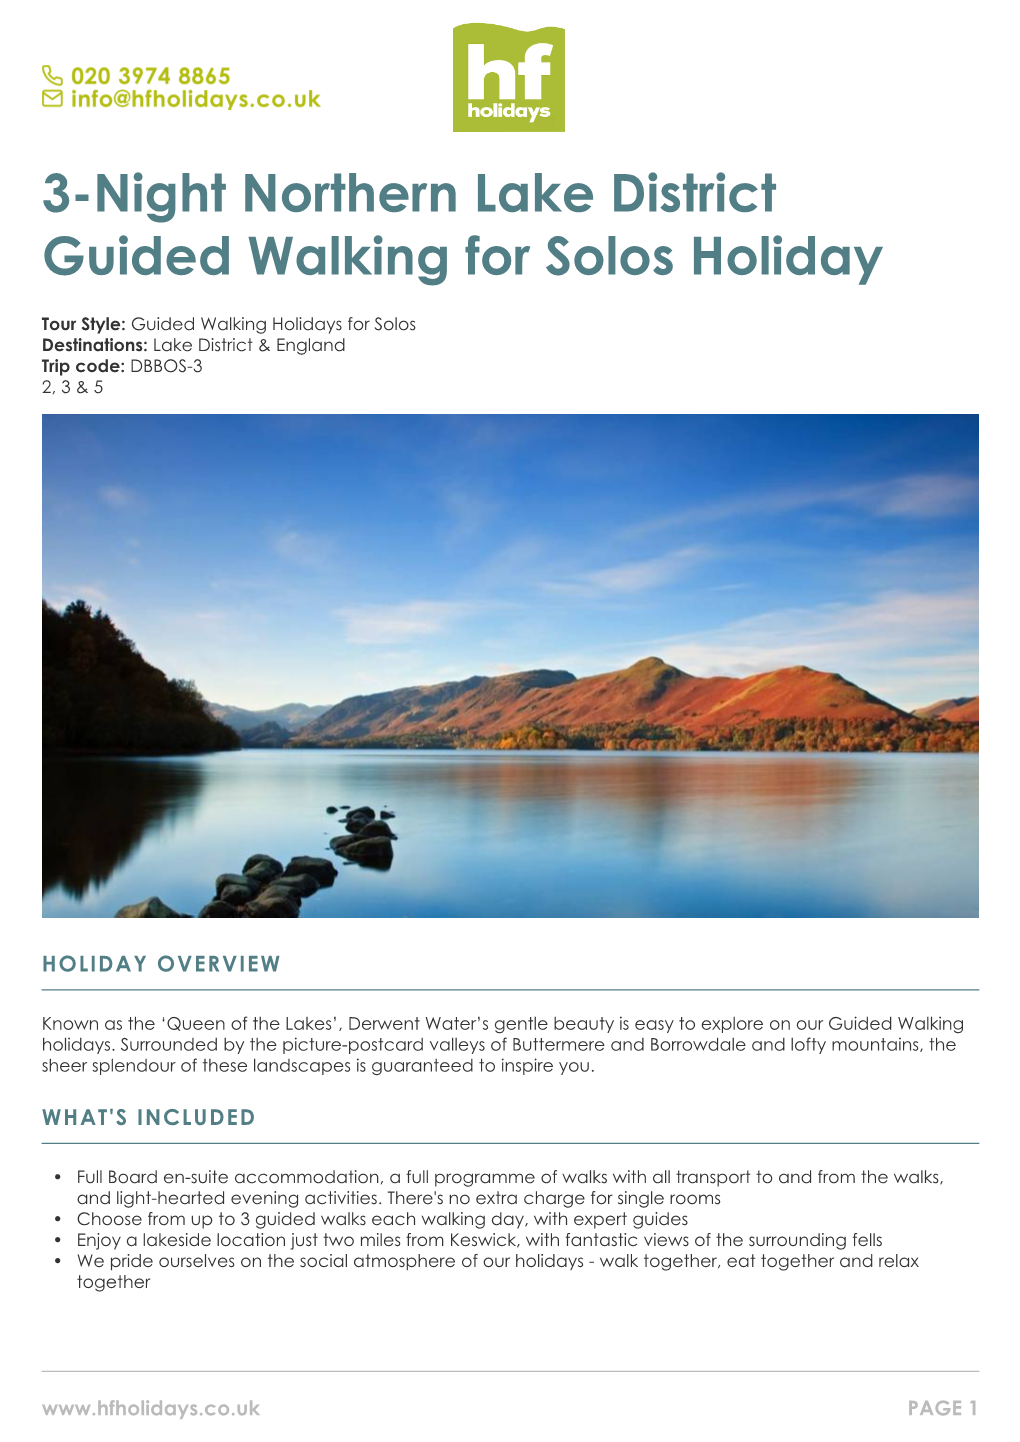 3-Night Northern Lake District Guided Walking for Solos Holiday